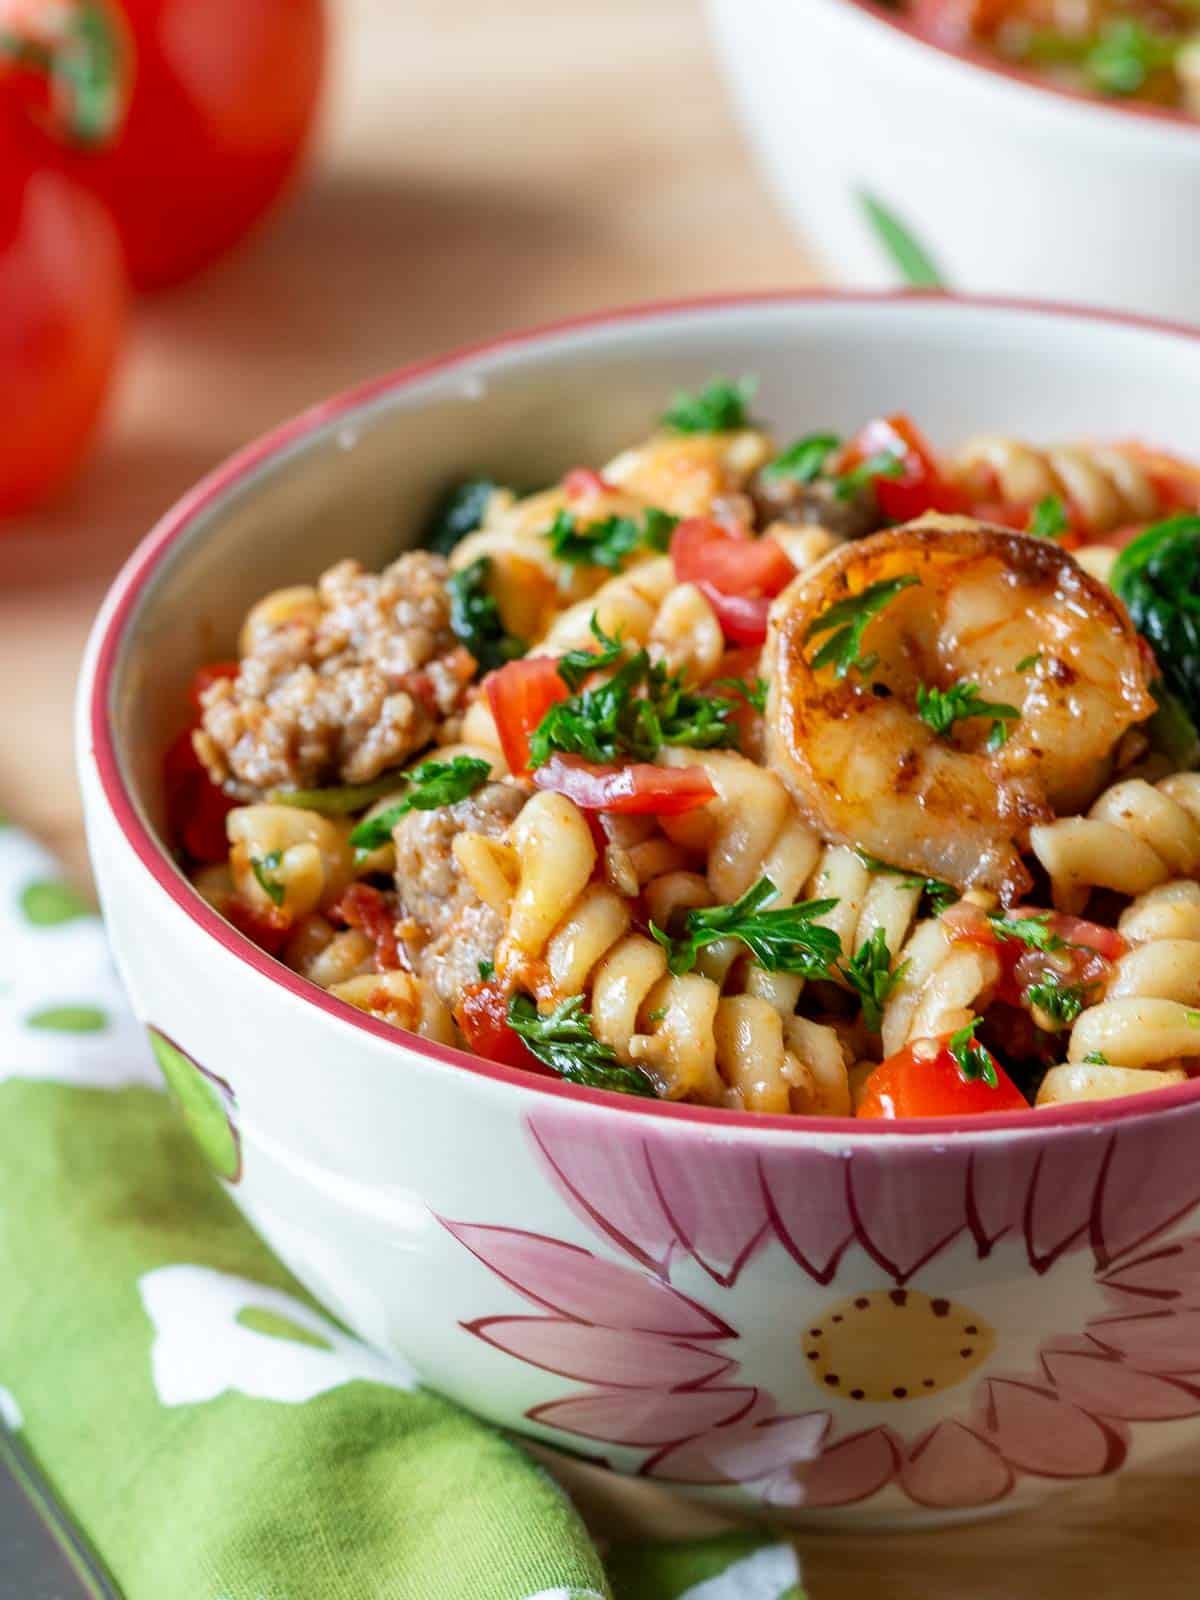 Italian sausage and shrimp mixed with a saucy pasta and served in a flowered bowl.